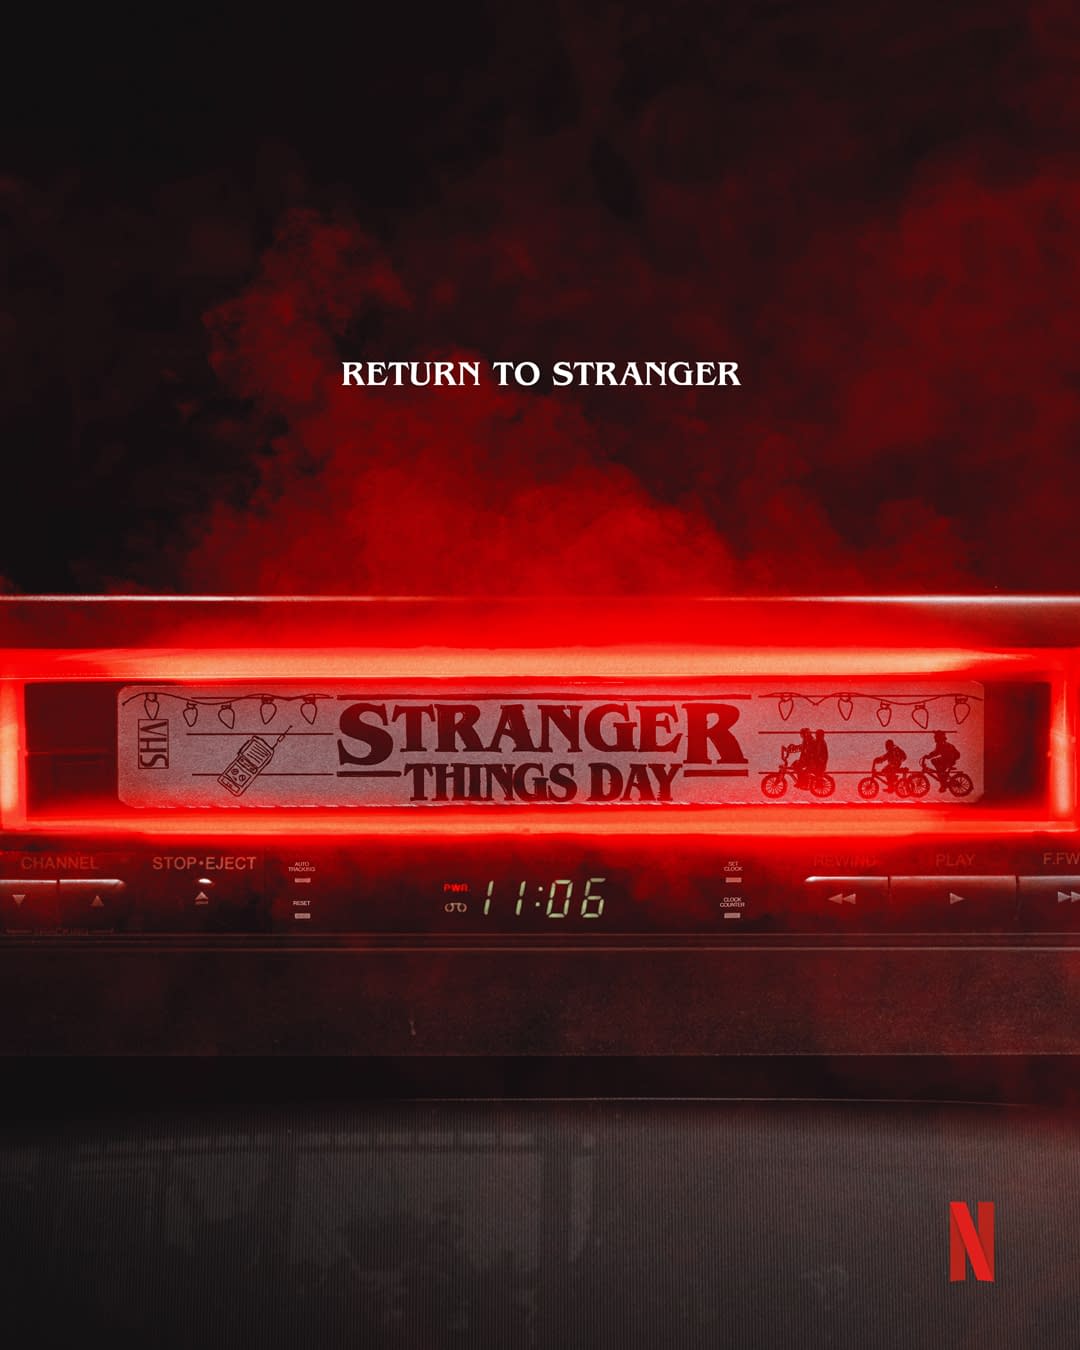 Could this poster contain a big secret about Stranger Things season 5?